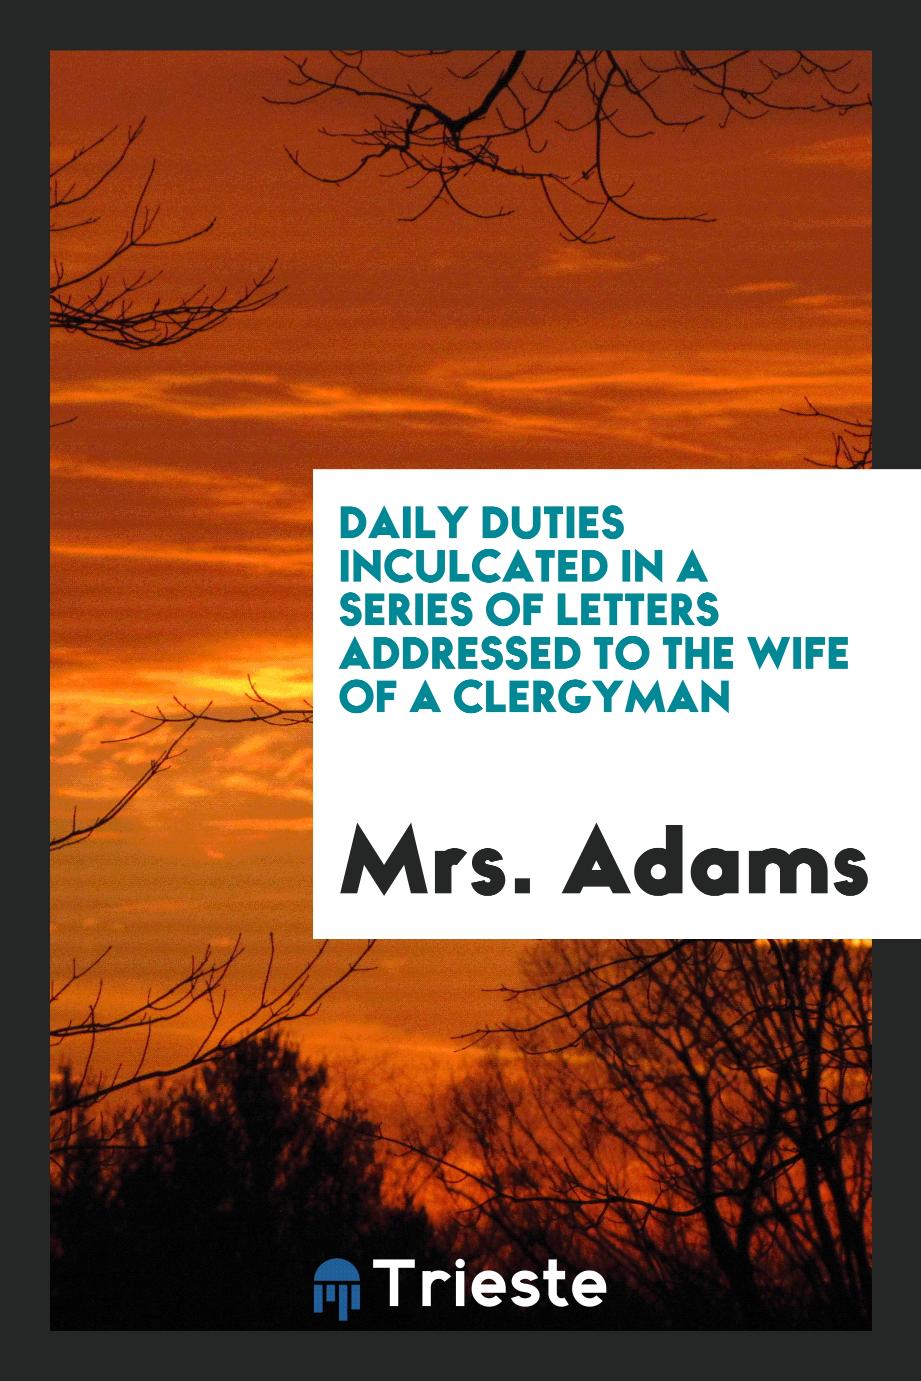 Daily Duties Inculcated in a Series of Letters Addressed to the Wife of a Clergyman